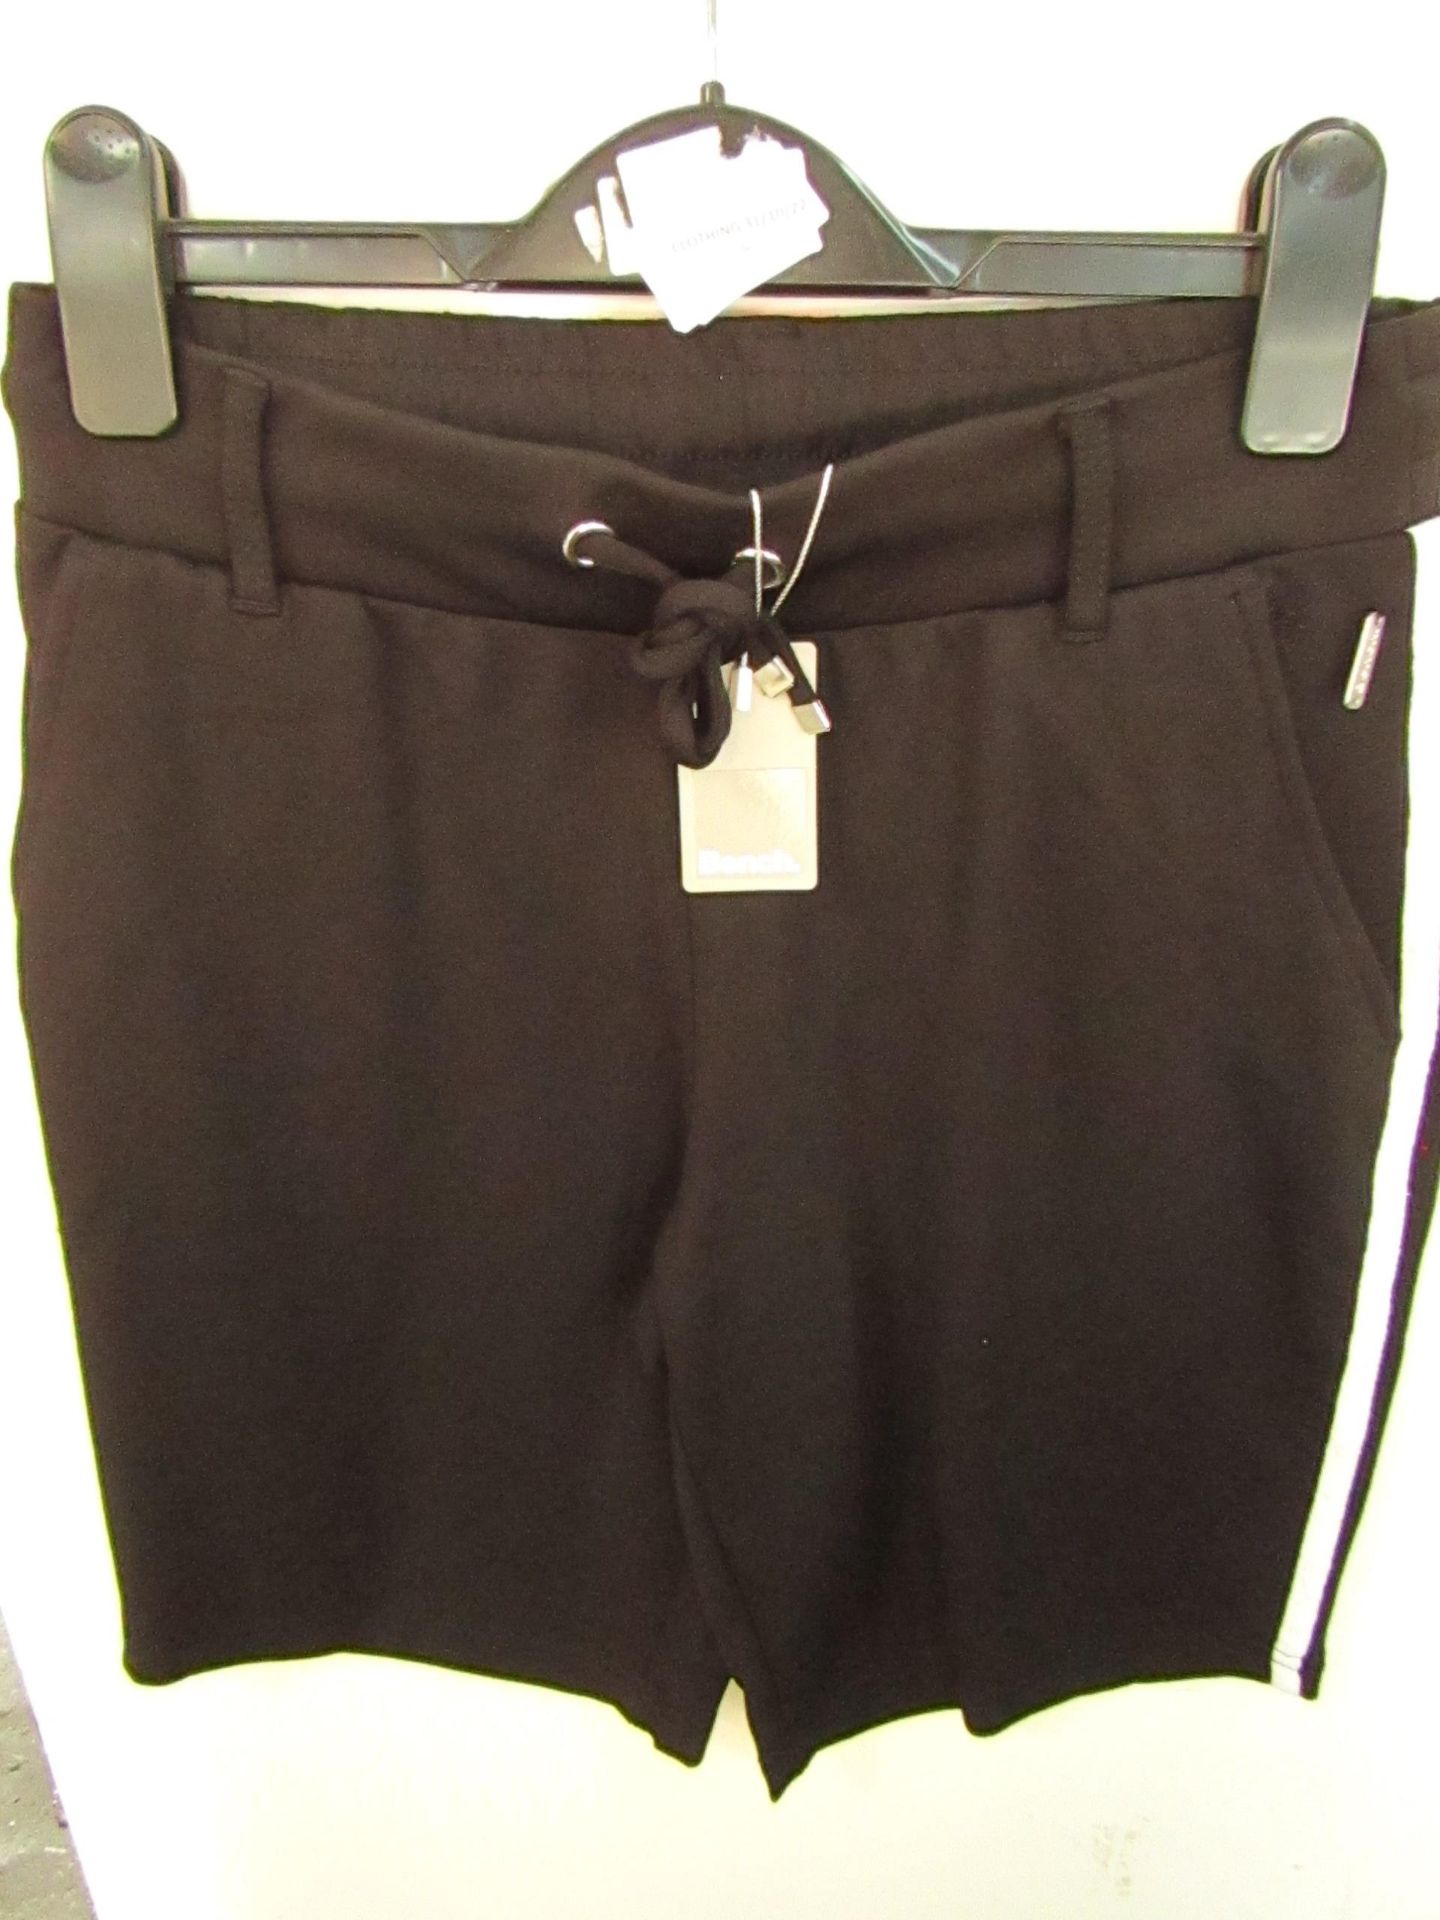 Bench Shorts Black With White Stripe Size 10 New With Tags